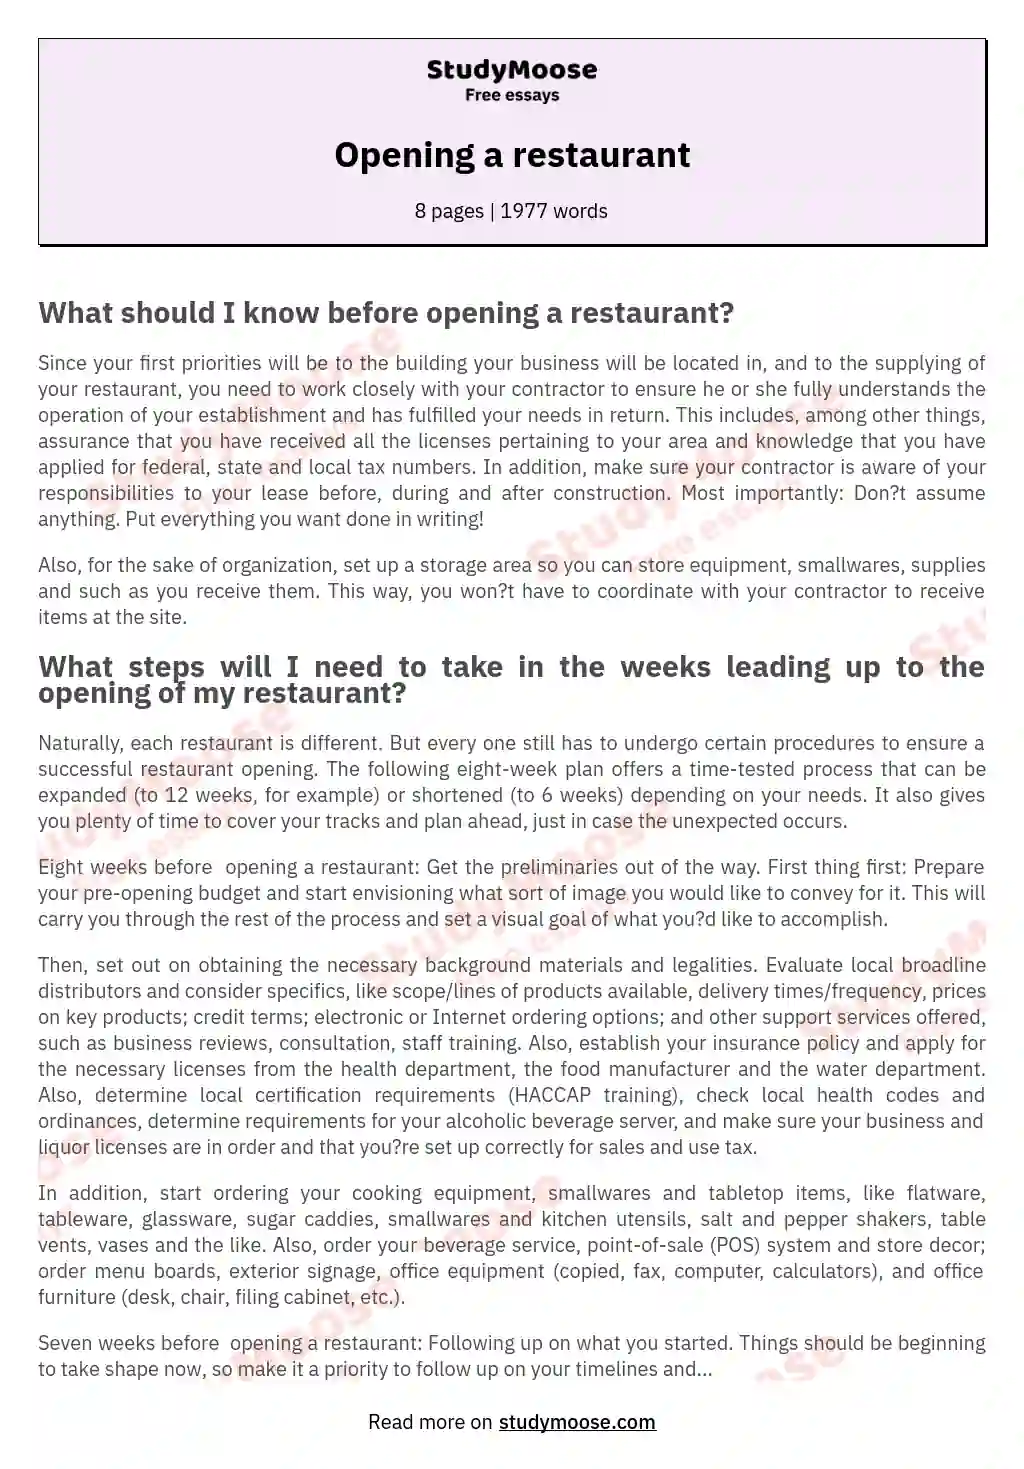 essay topics about restaurant industry